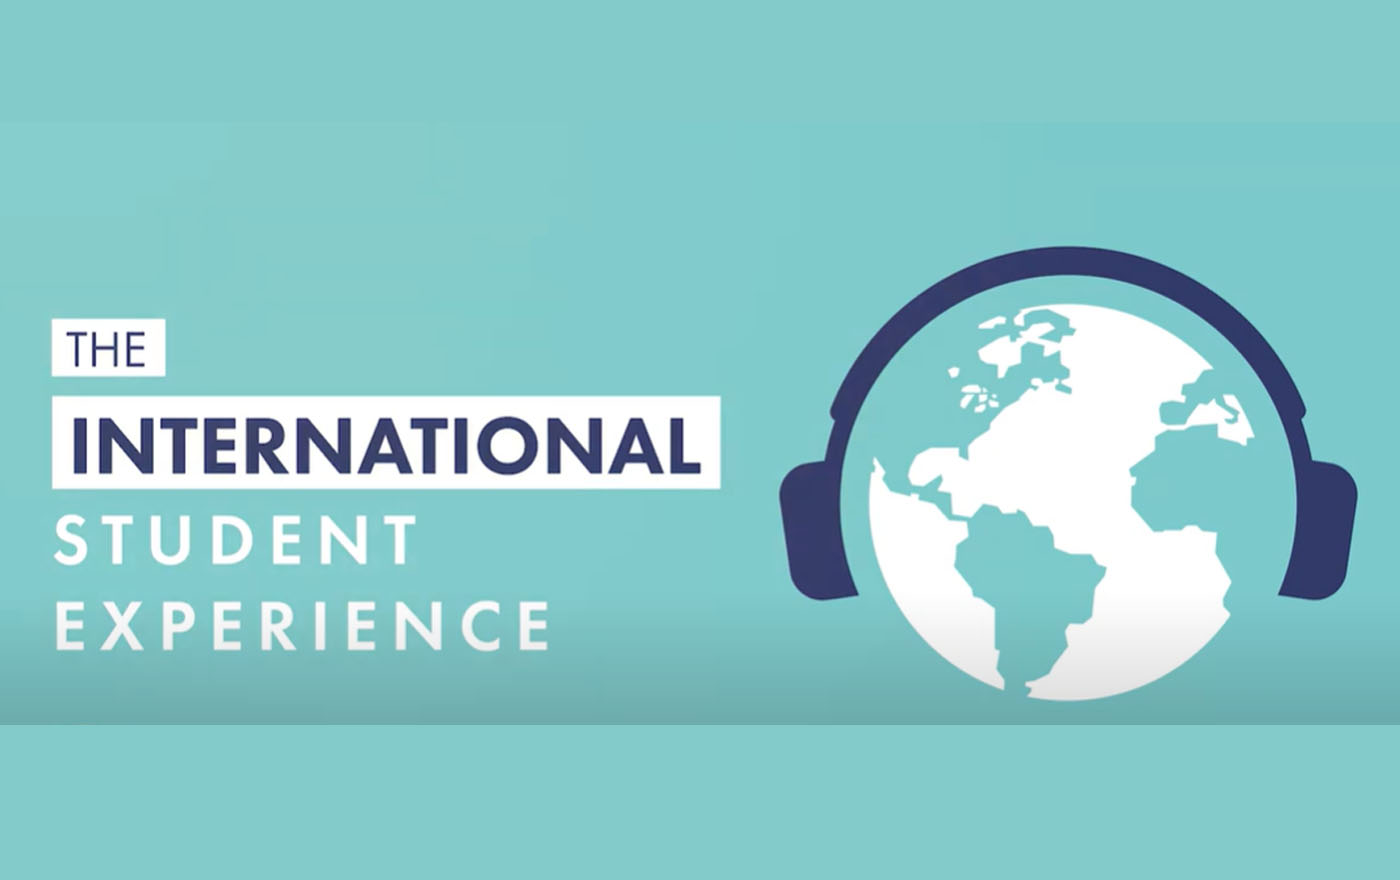 The international student experience podcast branding